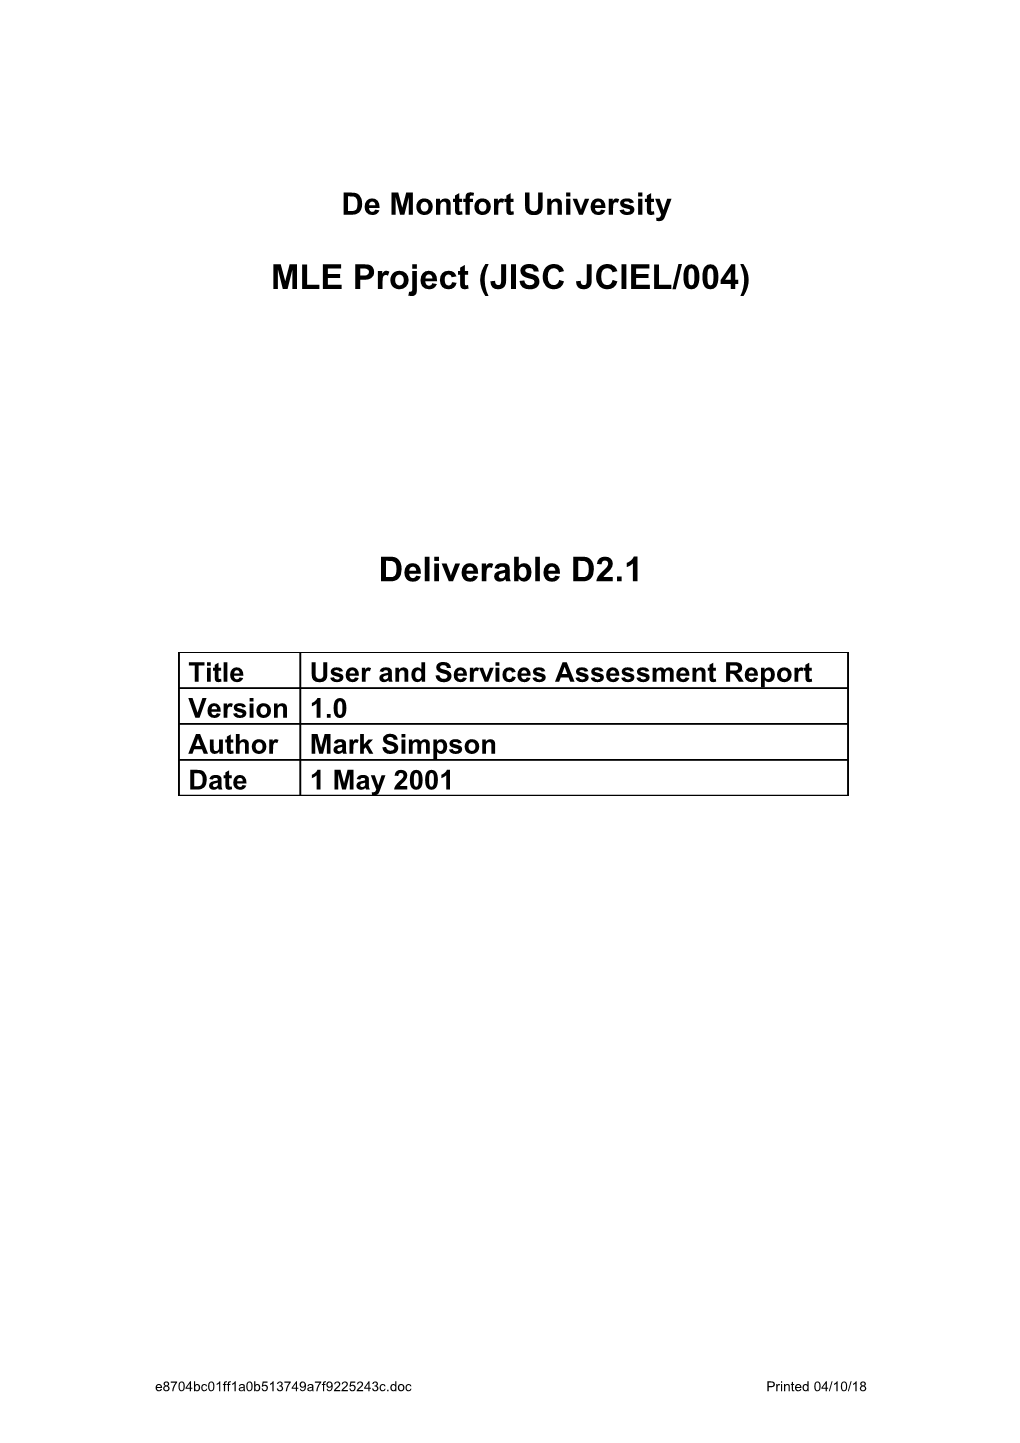 User and Services Assessment Report